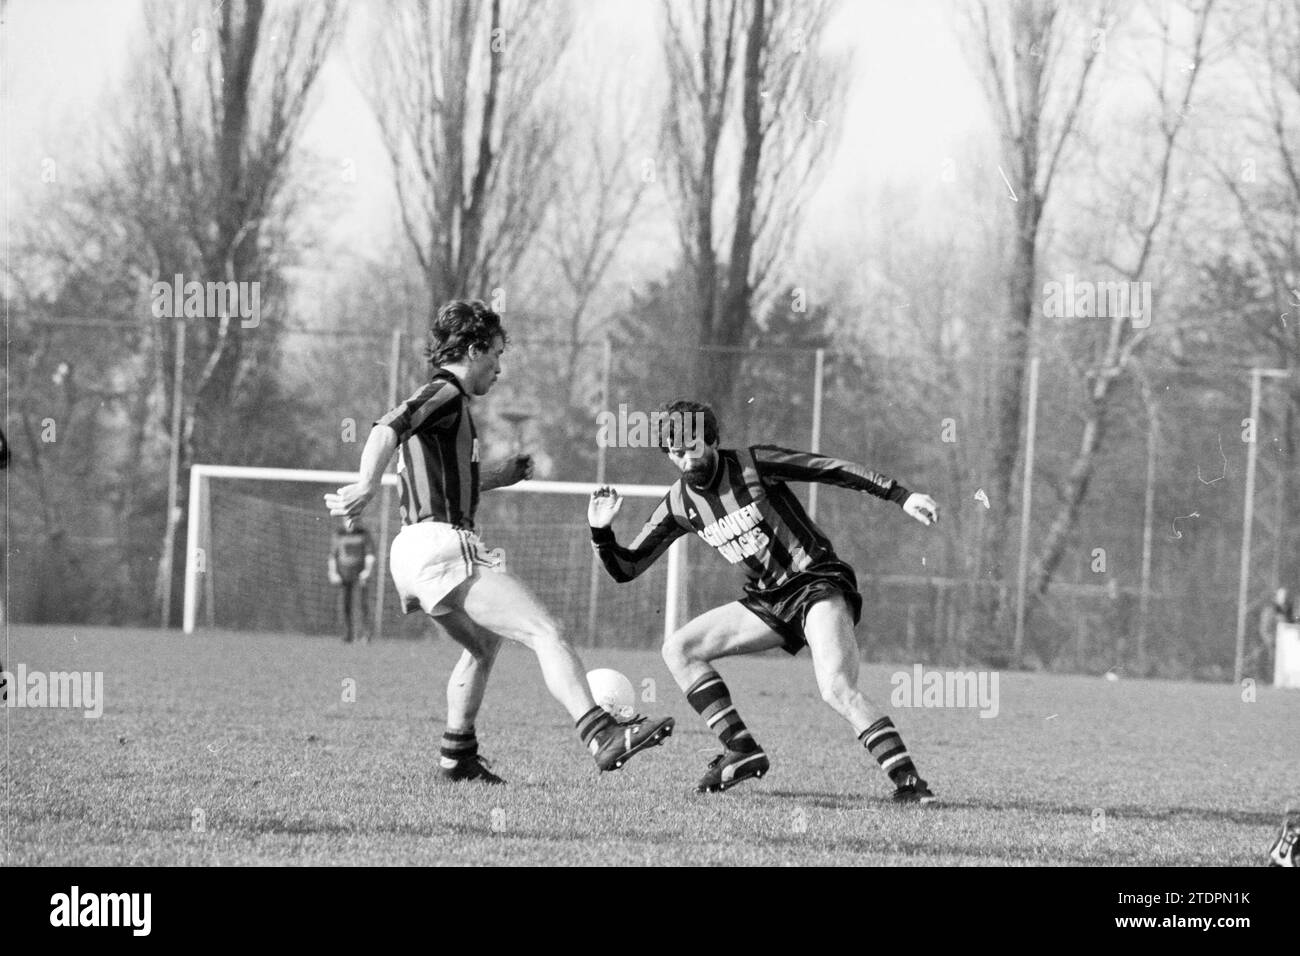 Football match EDO-RCH, 00-02-1984, Whizgle News from the Past, Tailored for the Future. Explore historical narratives, Dutch The Netherlands agency image with a modern perspective, bridging the gap between yesterday's events and tomorrow's insights. A timeless journey shaping the stories that shape our future Stock Photo